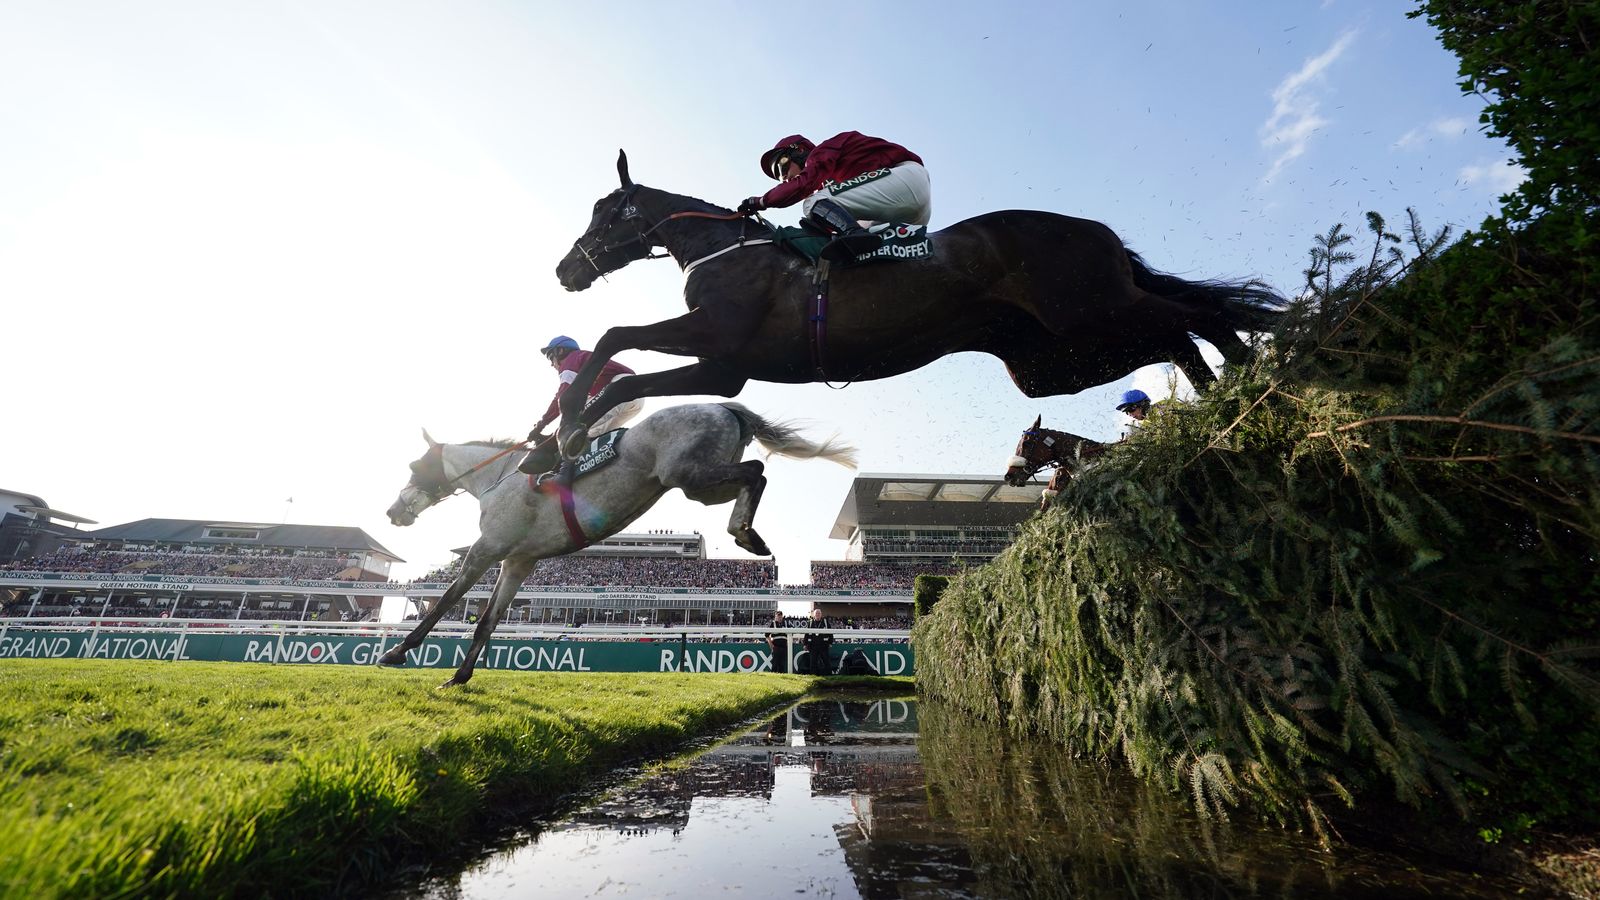 organisers insist changes have been made to grand national - as two horses die at aintree